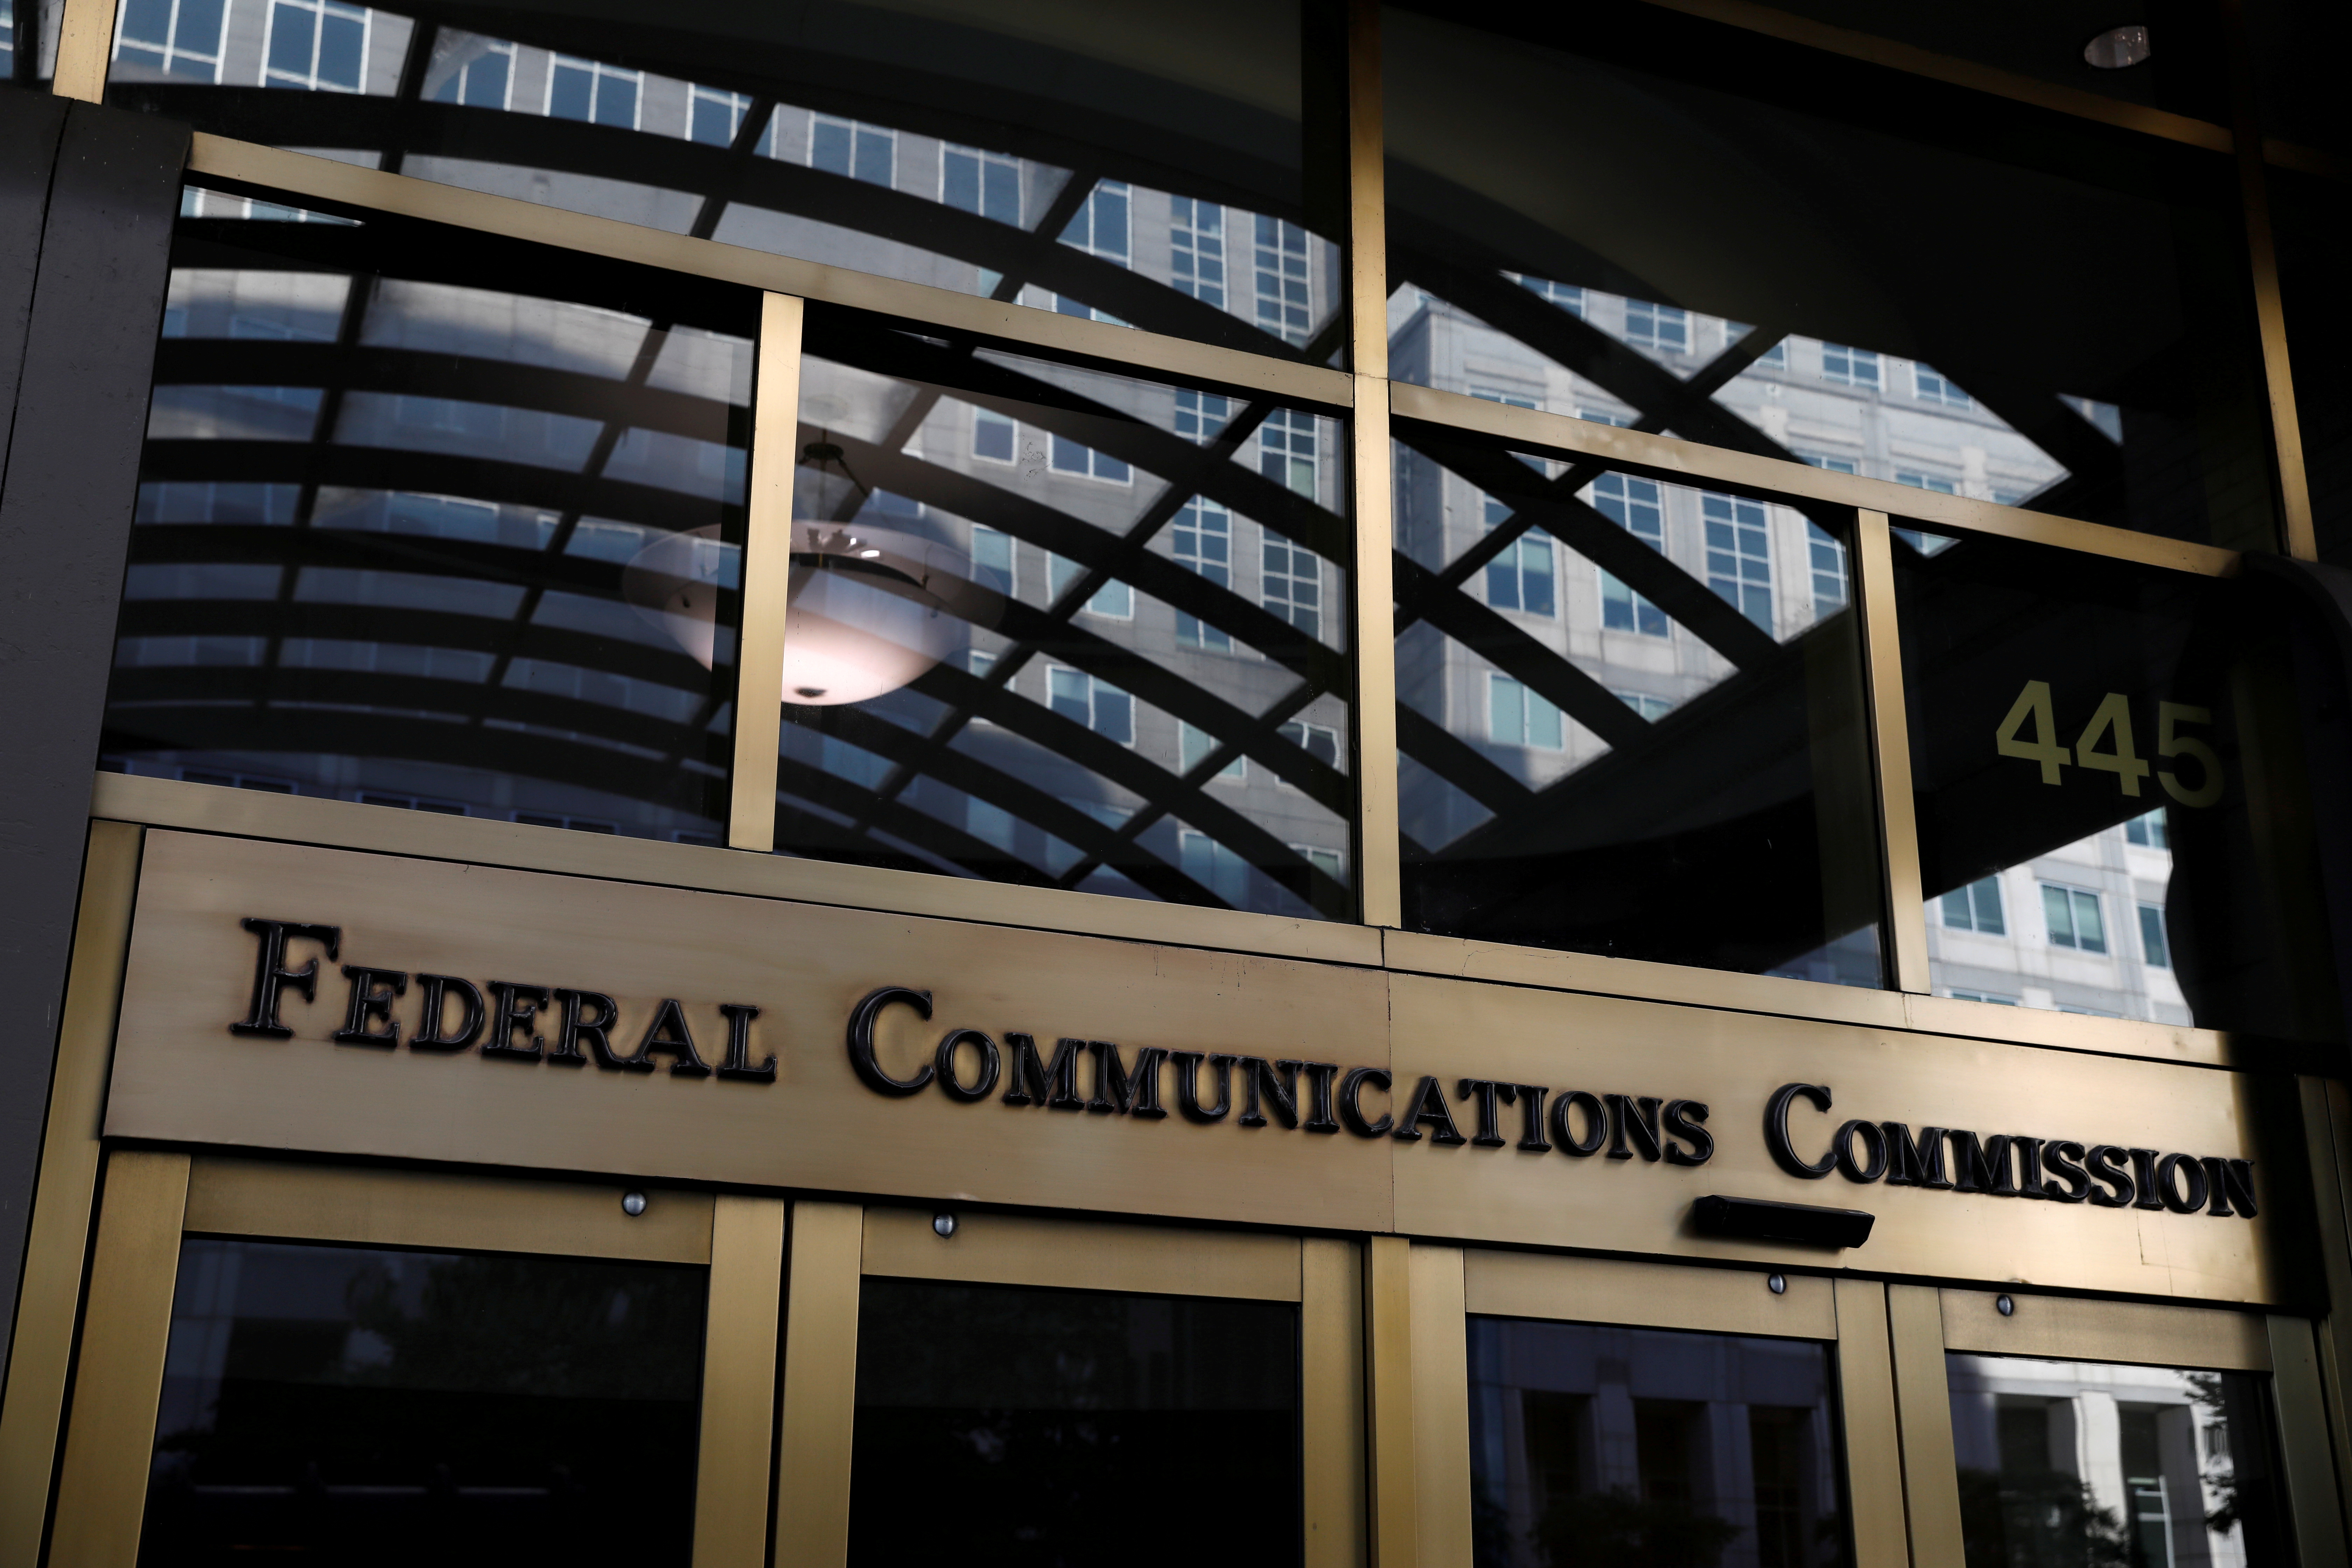 Signage is seen at the headquarters of the Federal Communications Commission in Washington, D.C.